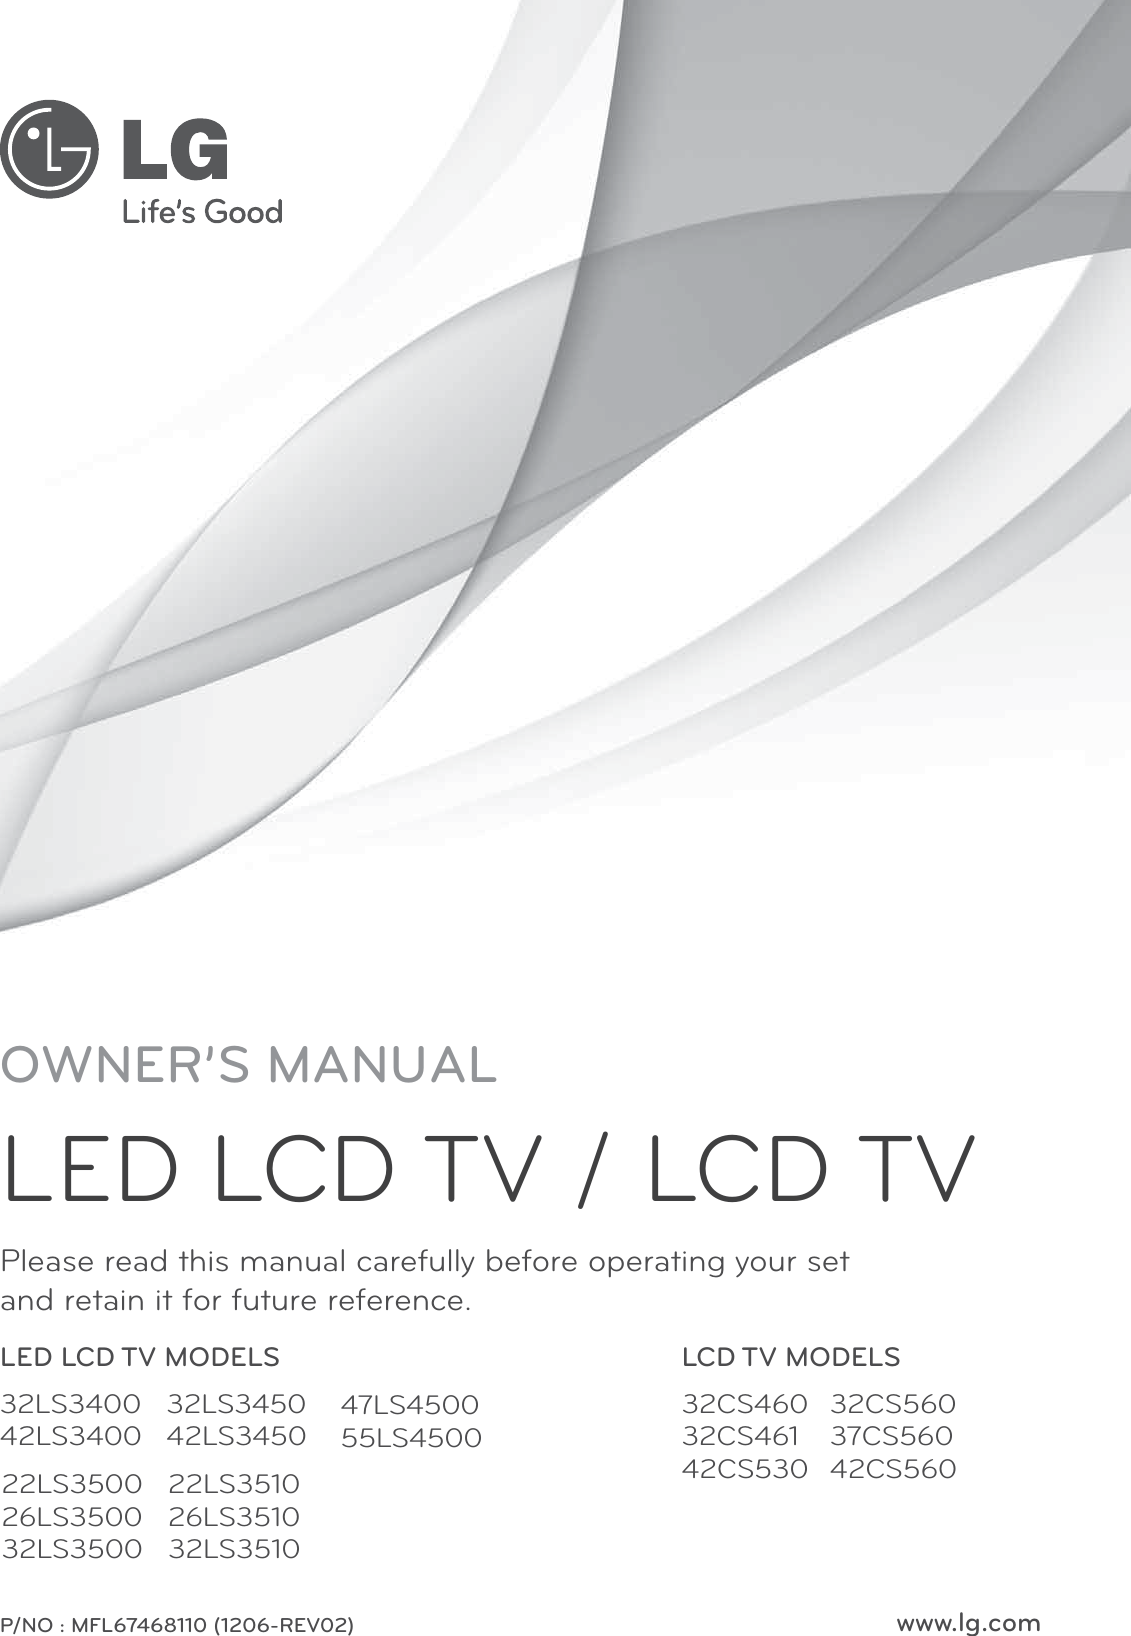 www.lg.comPlease read this manual carefully before operating your set  and retain it for future reference.P/NO : MFL67468110 (1206-REV02)OWNER’S MANUALLED LCD TV / LCD TVLED LCD TV MODELS LCD TV MODELS32LS340042LS340032LS345042LS345047LS450055LS450022LS350026LS350032LS350022LS351026LS351032LS351032CS46032CS46142CS53032CS56037CS56042CS560